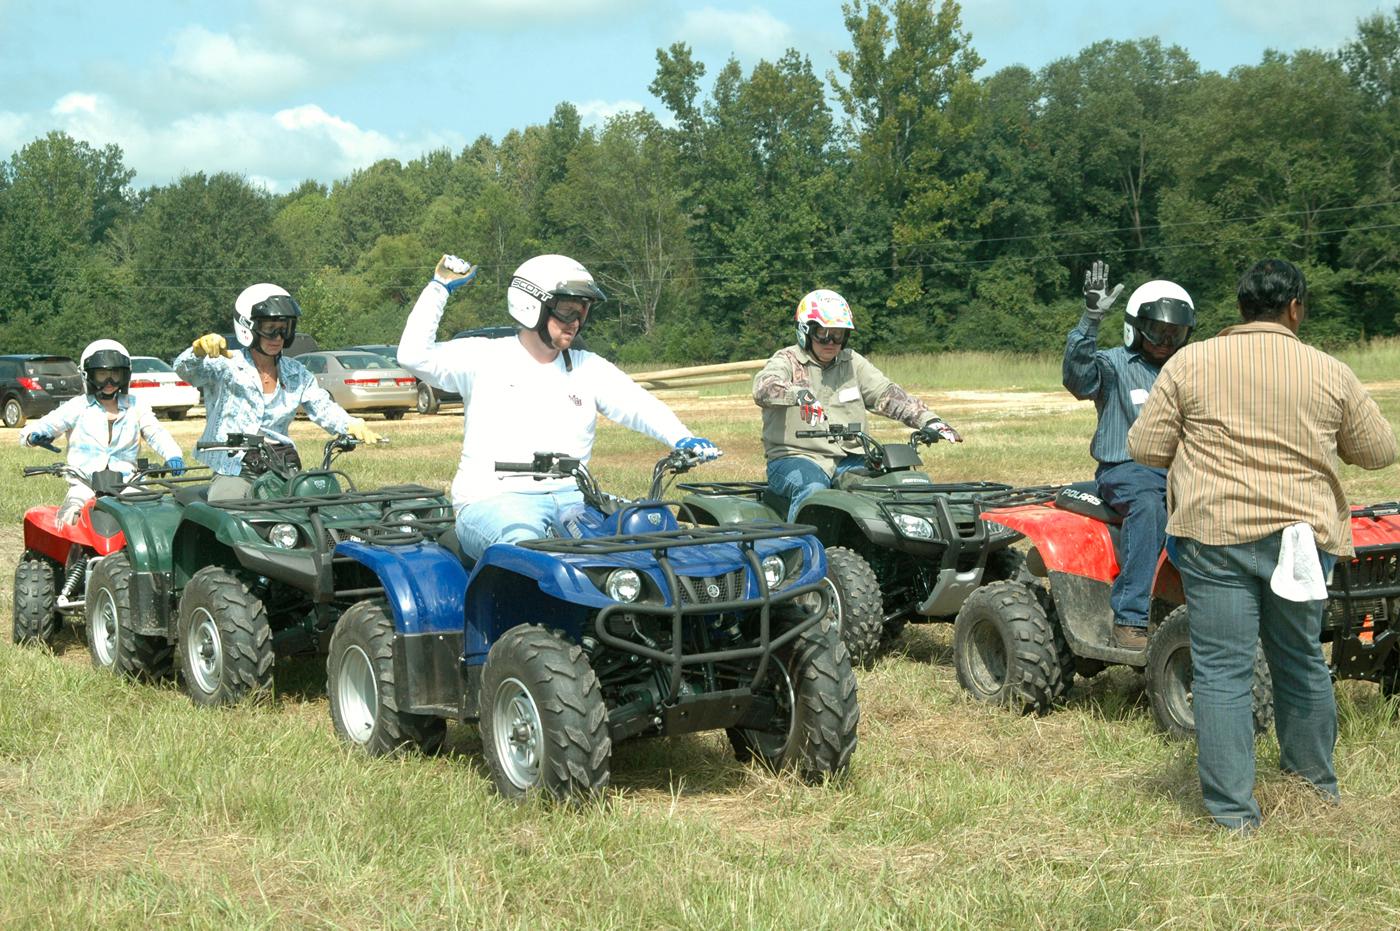 Five members of Mississippi State University's 4-H program staff raise their right hands to signal Clay County youth agent Fran Brock, who serves as the starter. From left are Betty Rawlings, Mary Riley, Landon Summers, Morris Houston and Harvey Gordon, who were test subjects for Brock's certification as a national ATV safety instructor. (Photo by Patti Drapala)